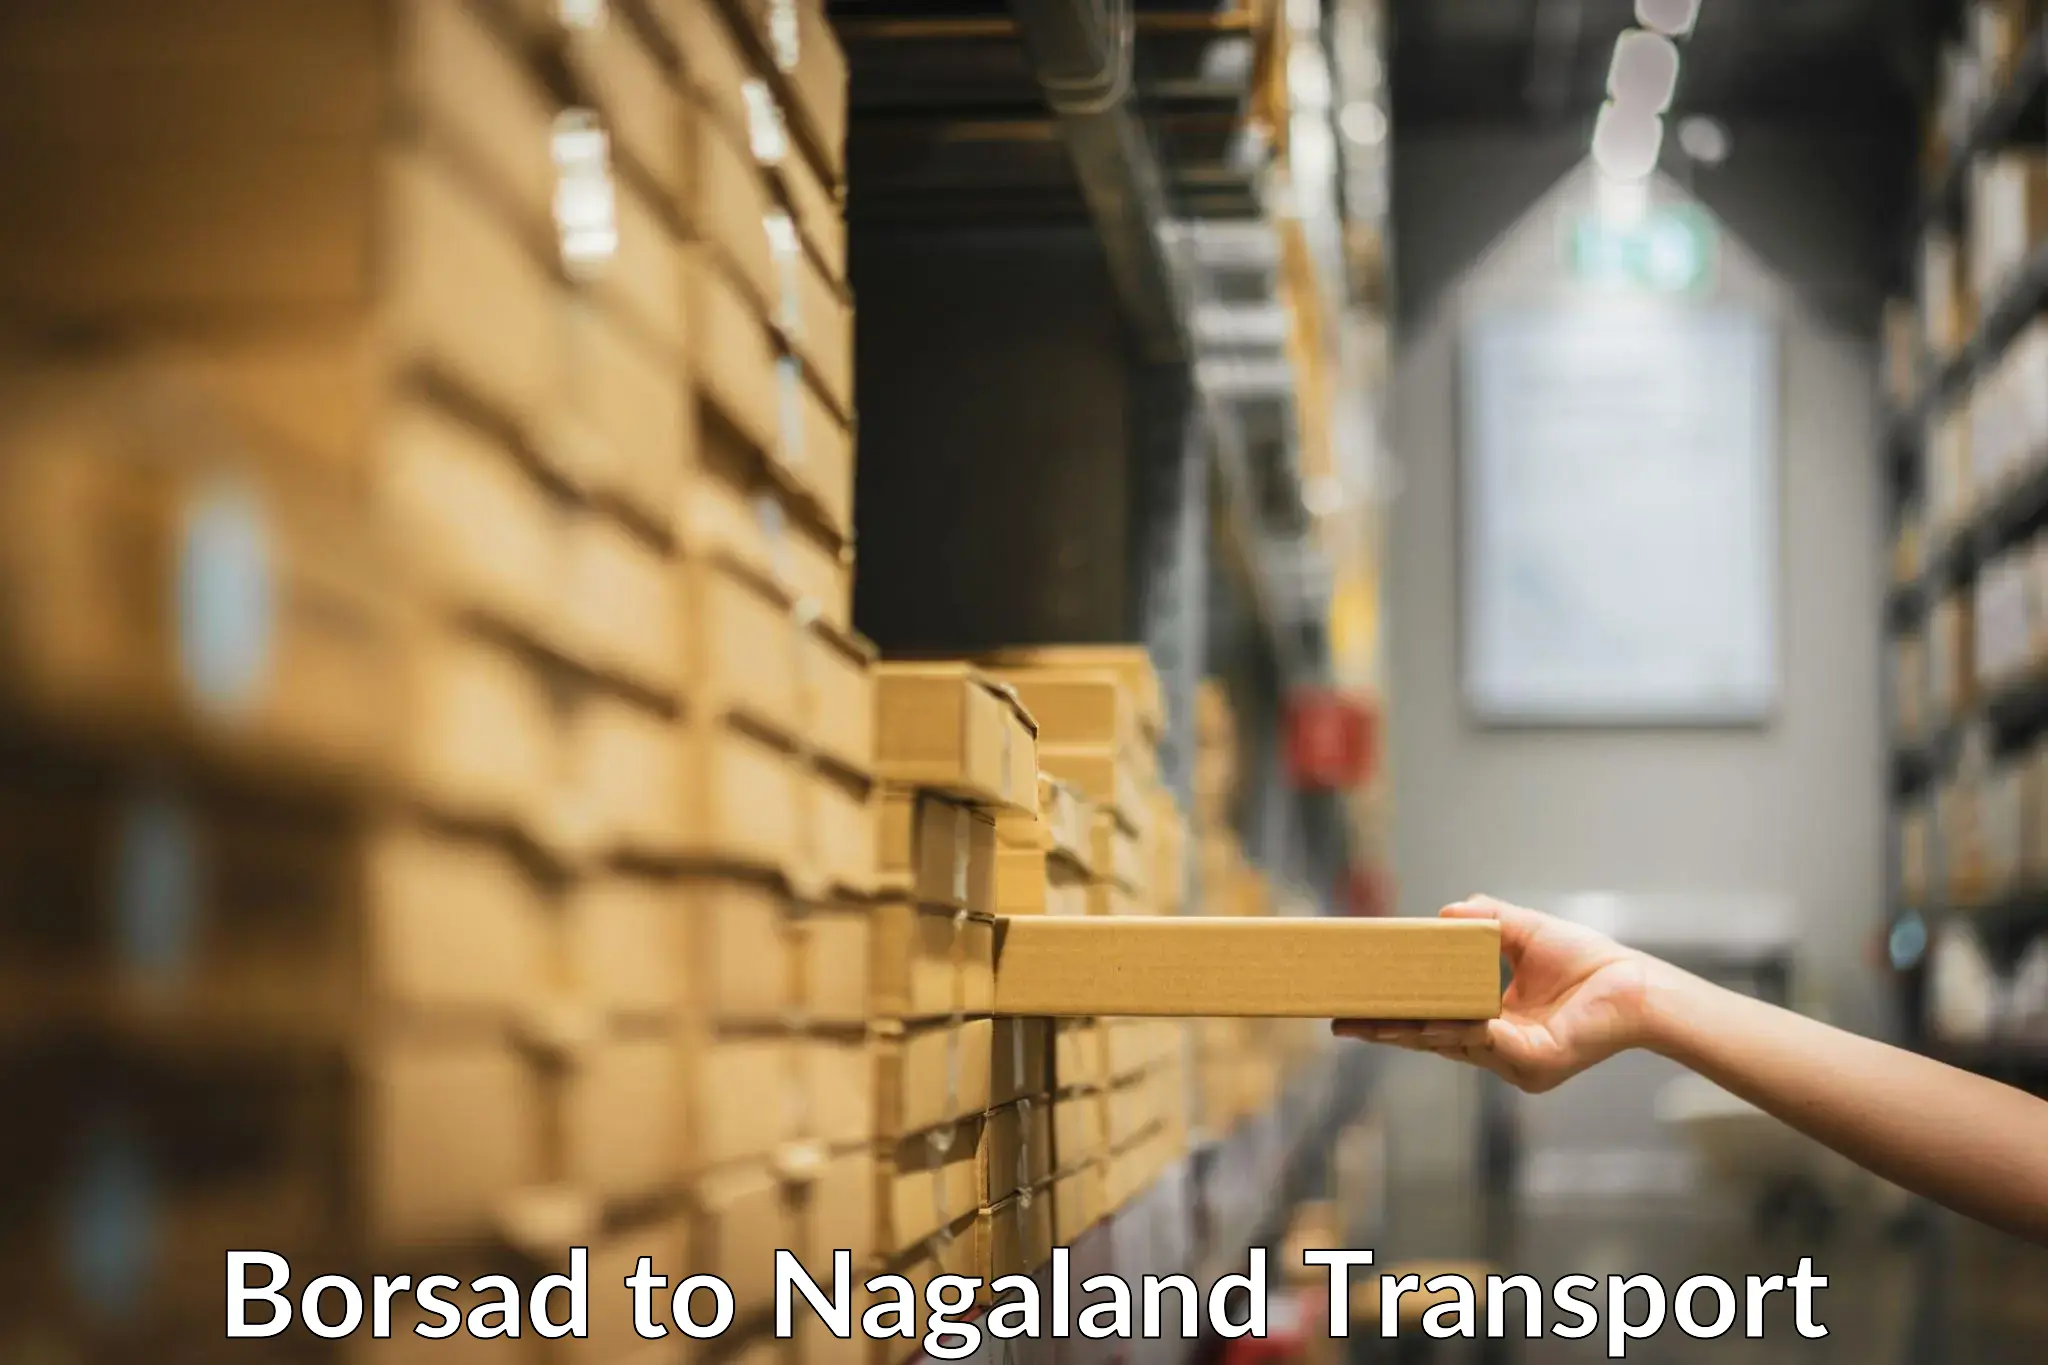 Transport shared services in Borsad to Nagaland